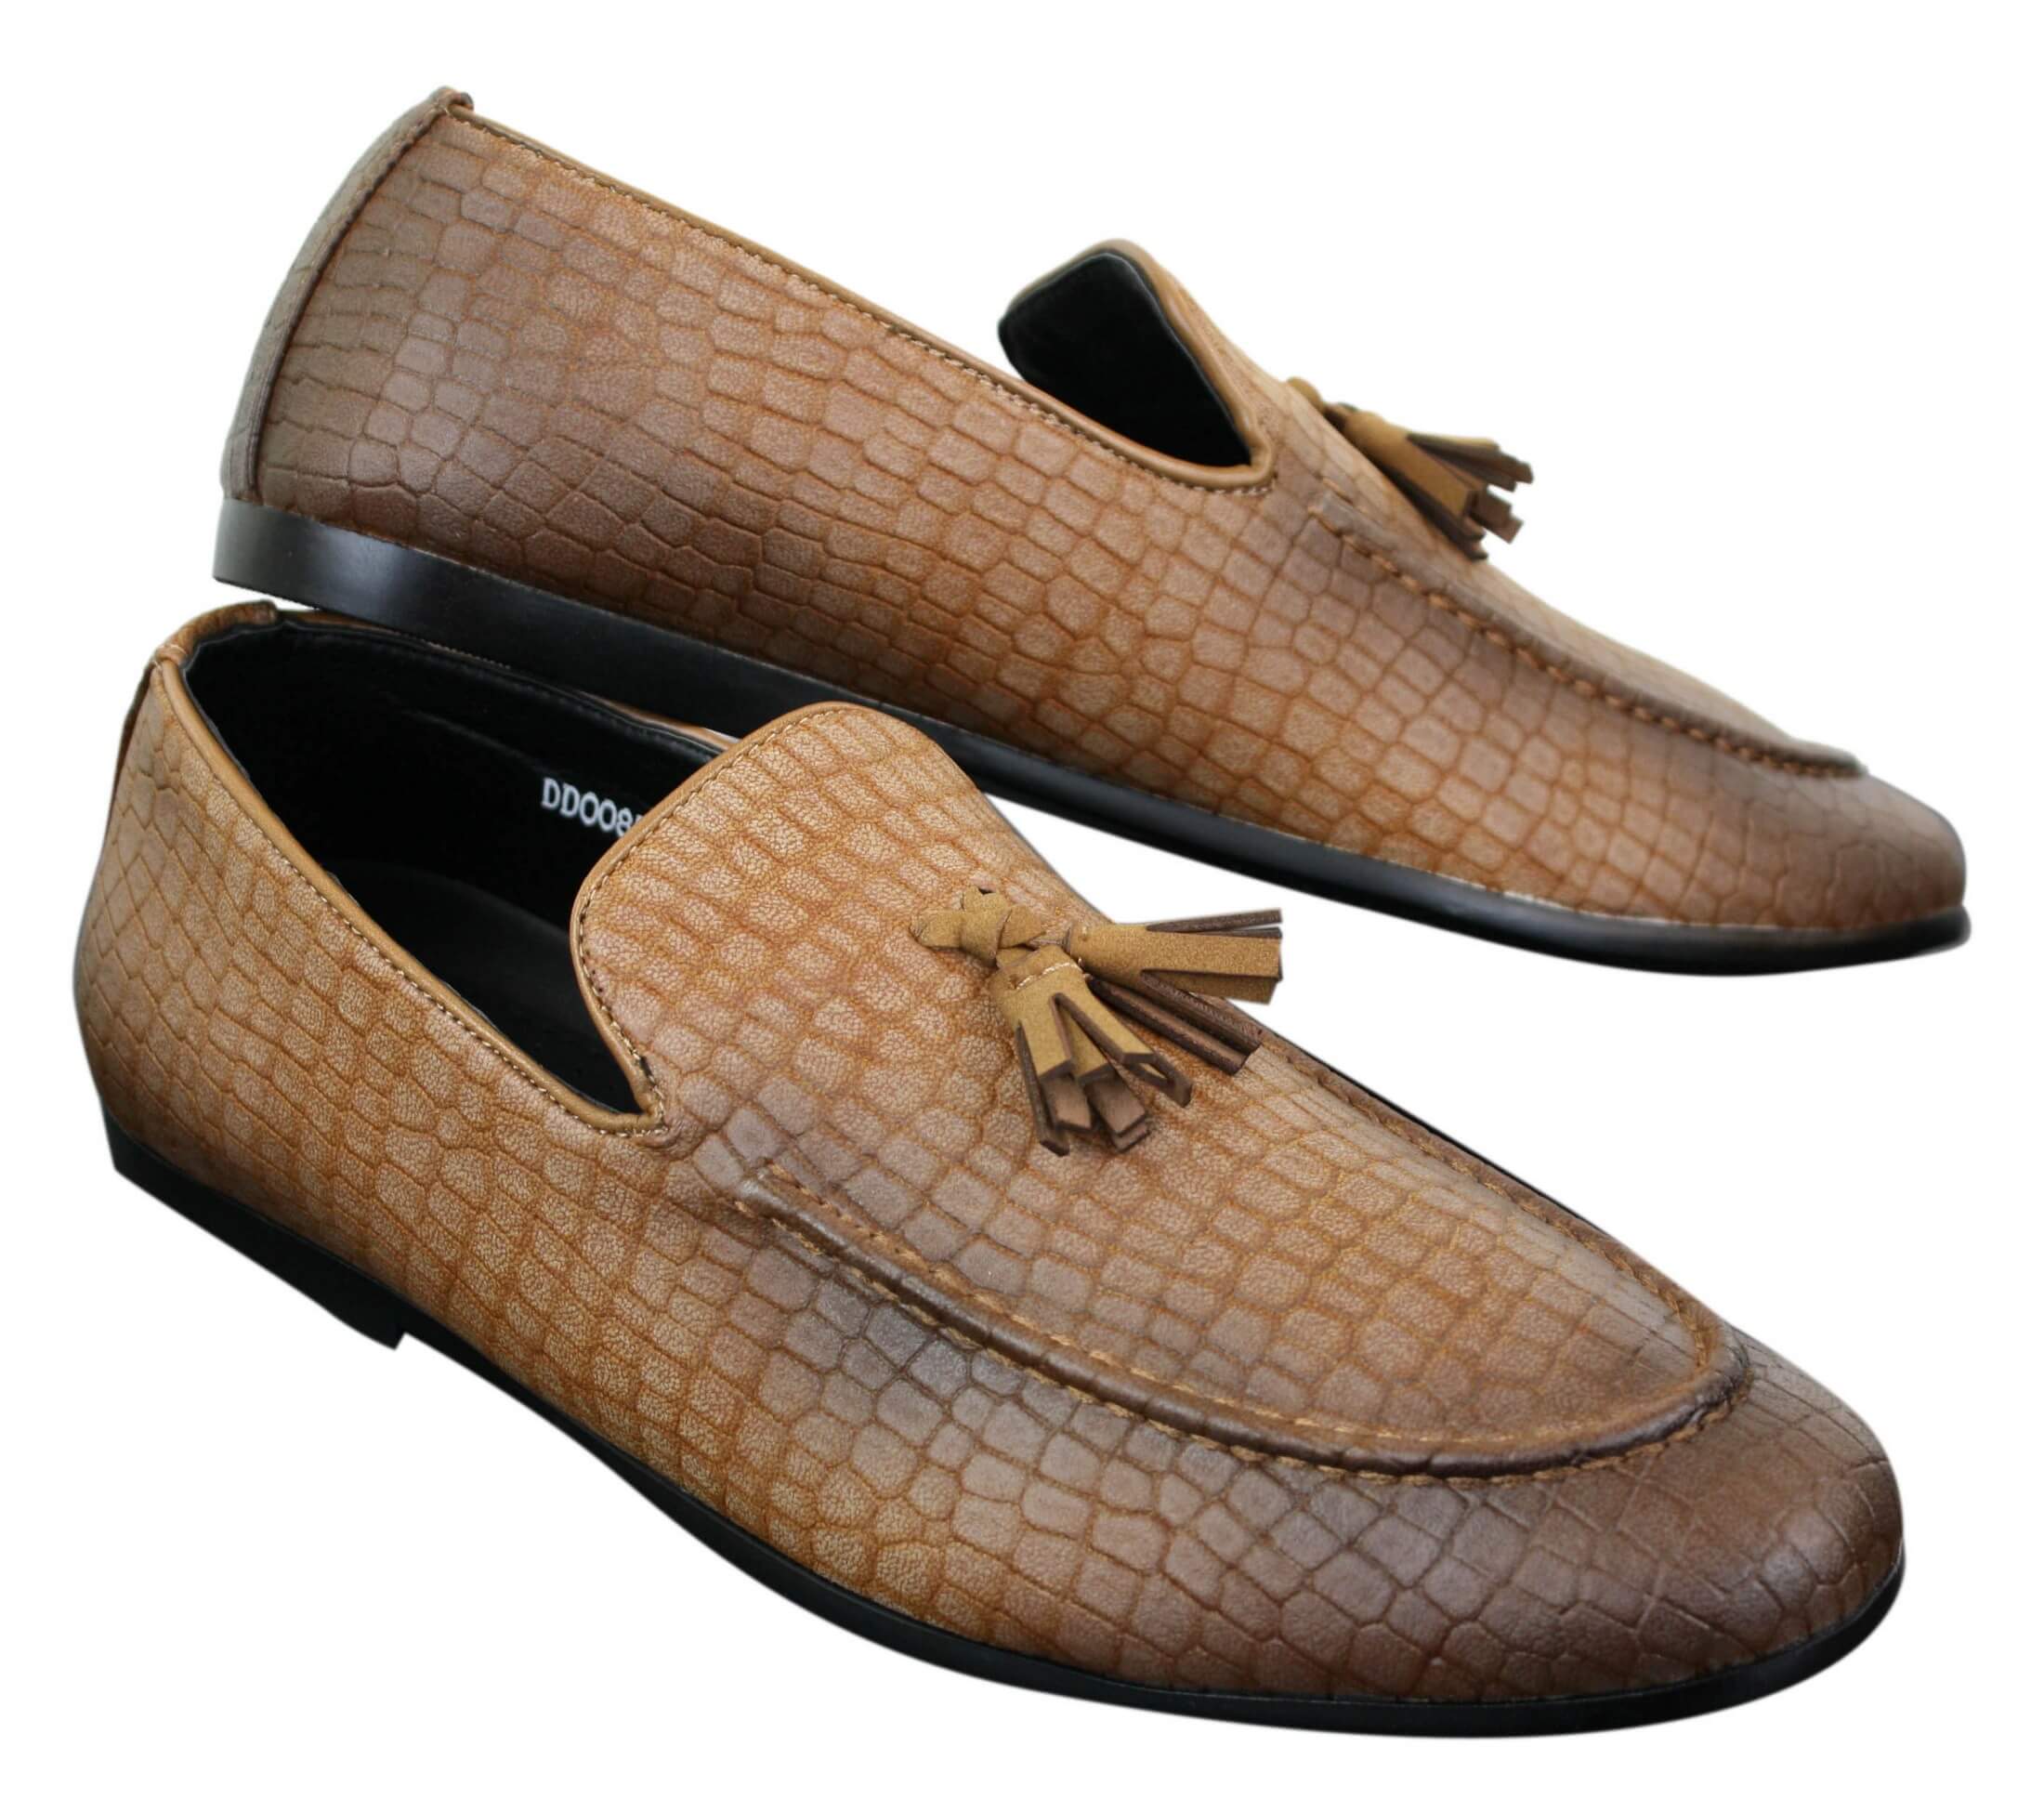 Elong DD0085 - Mens Snake Crocodile Leather PU Loafers Driving Shoes ...